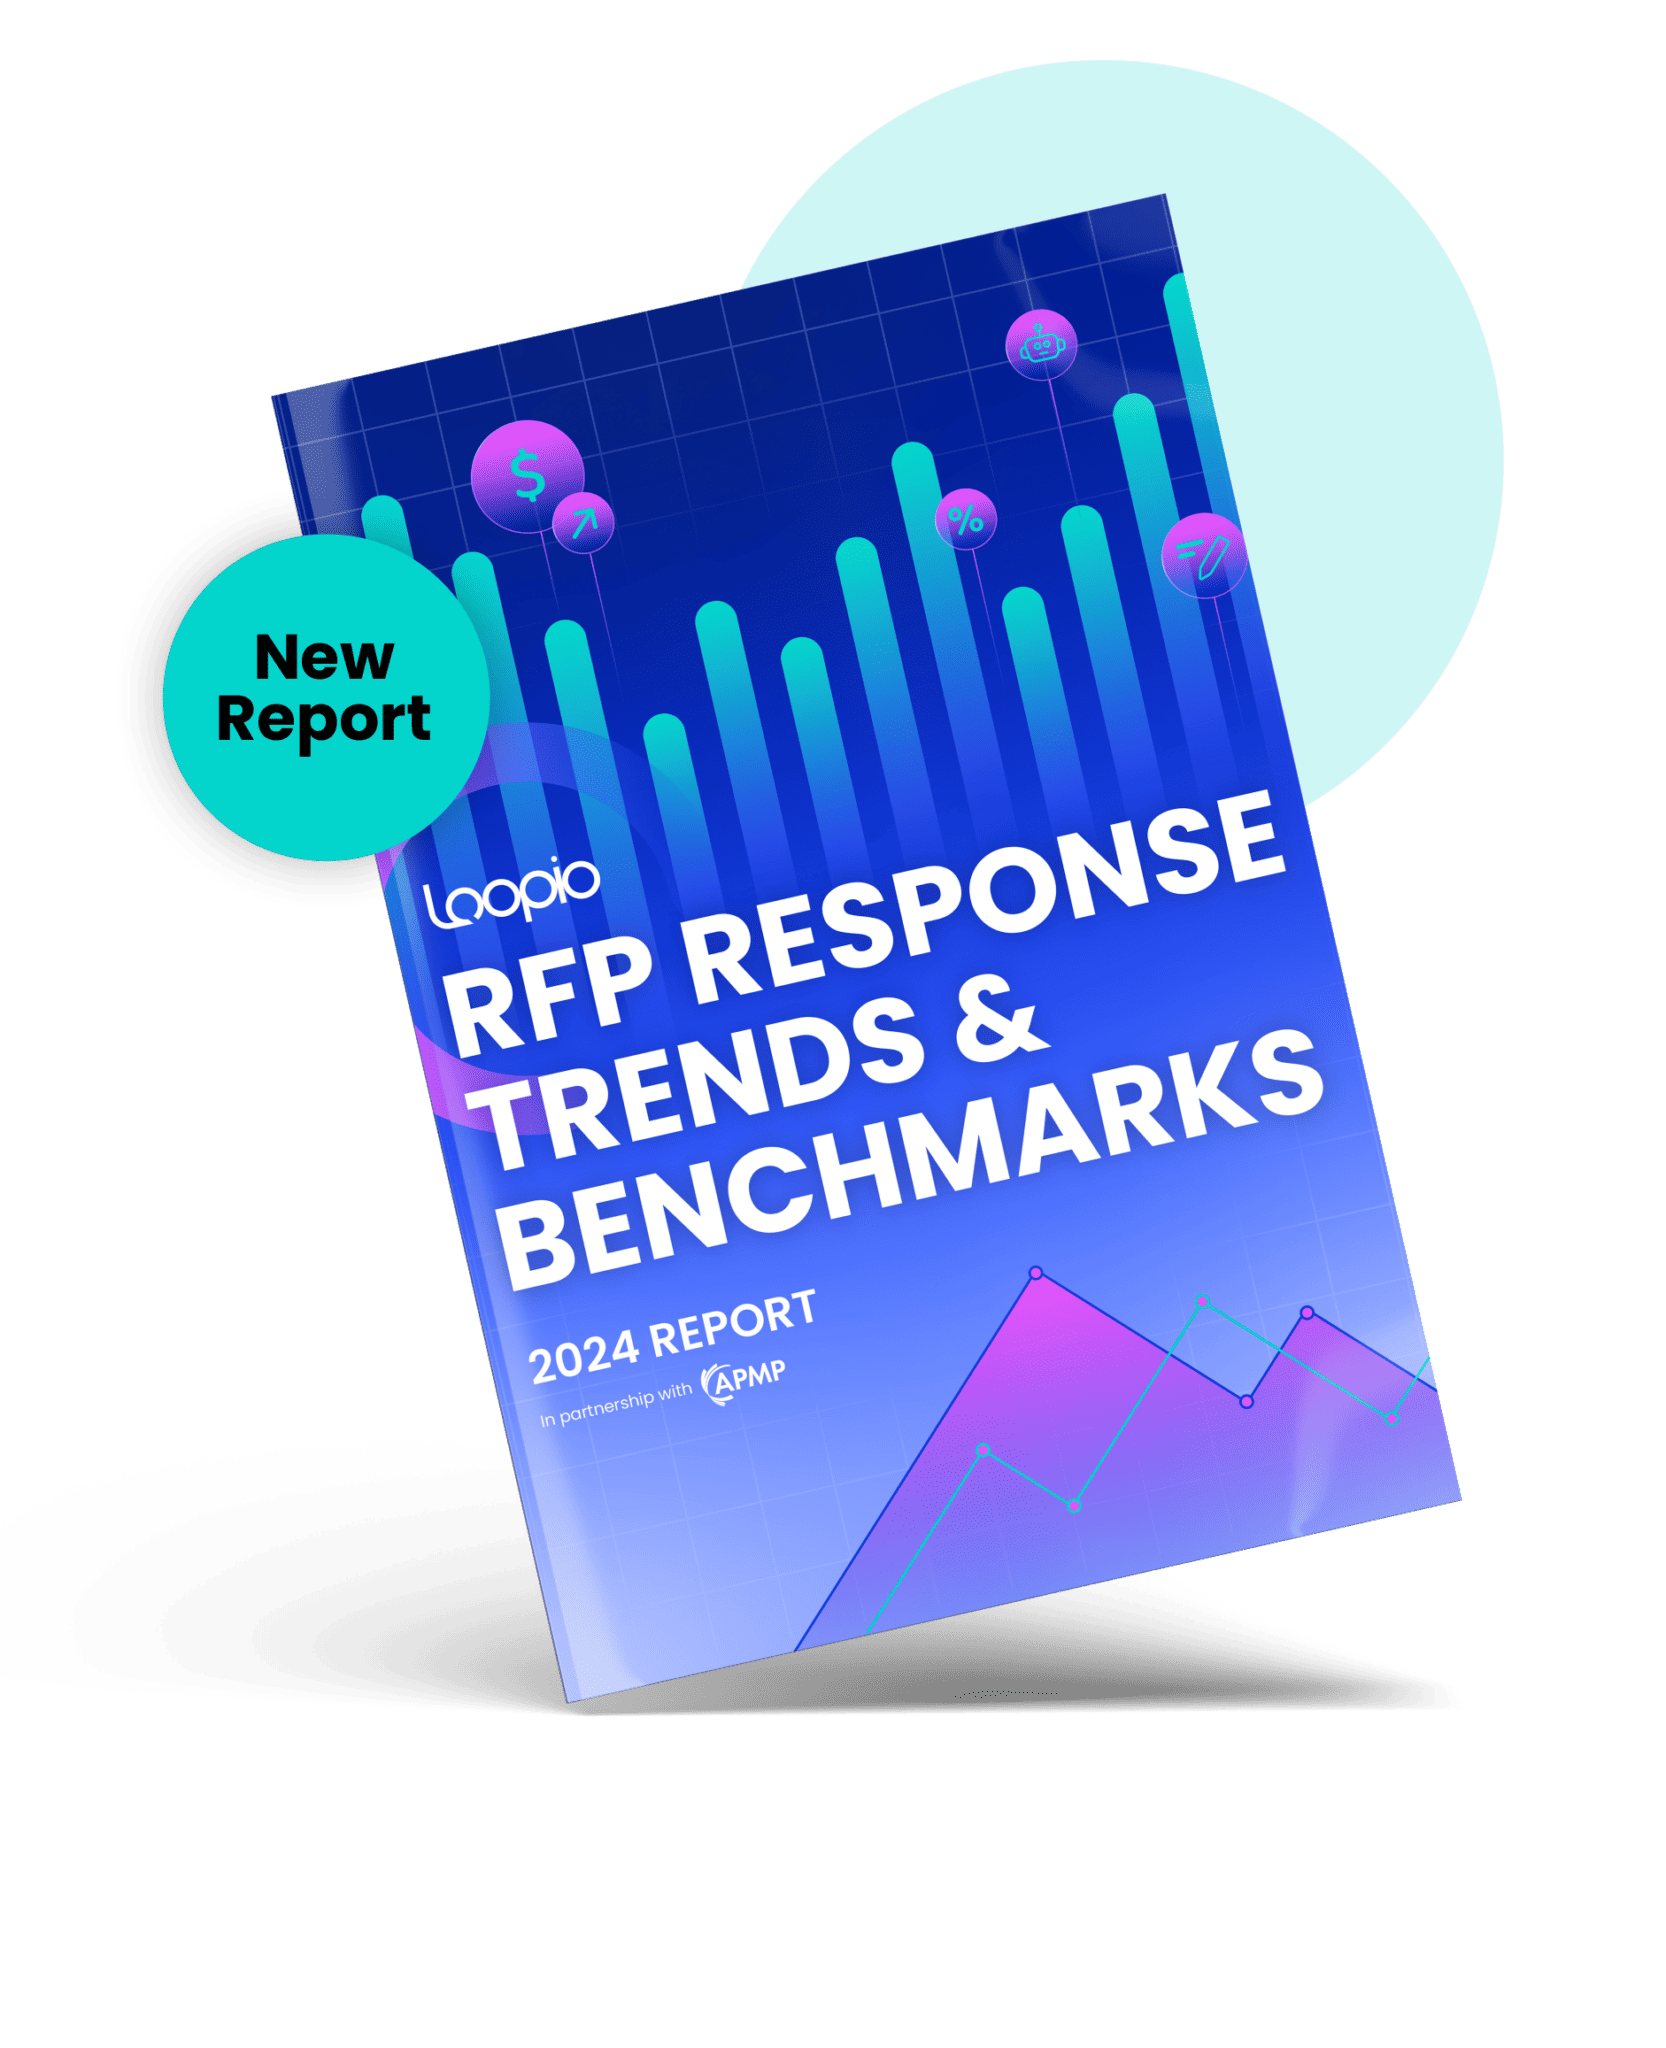 RFP Report 2024 Trends & Benchmarks